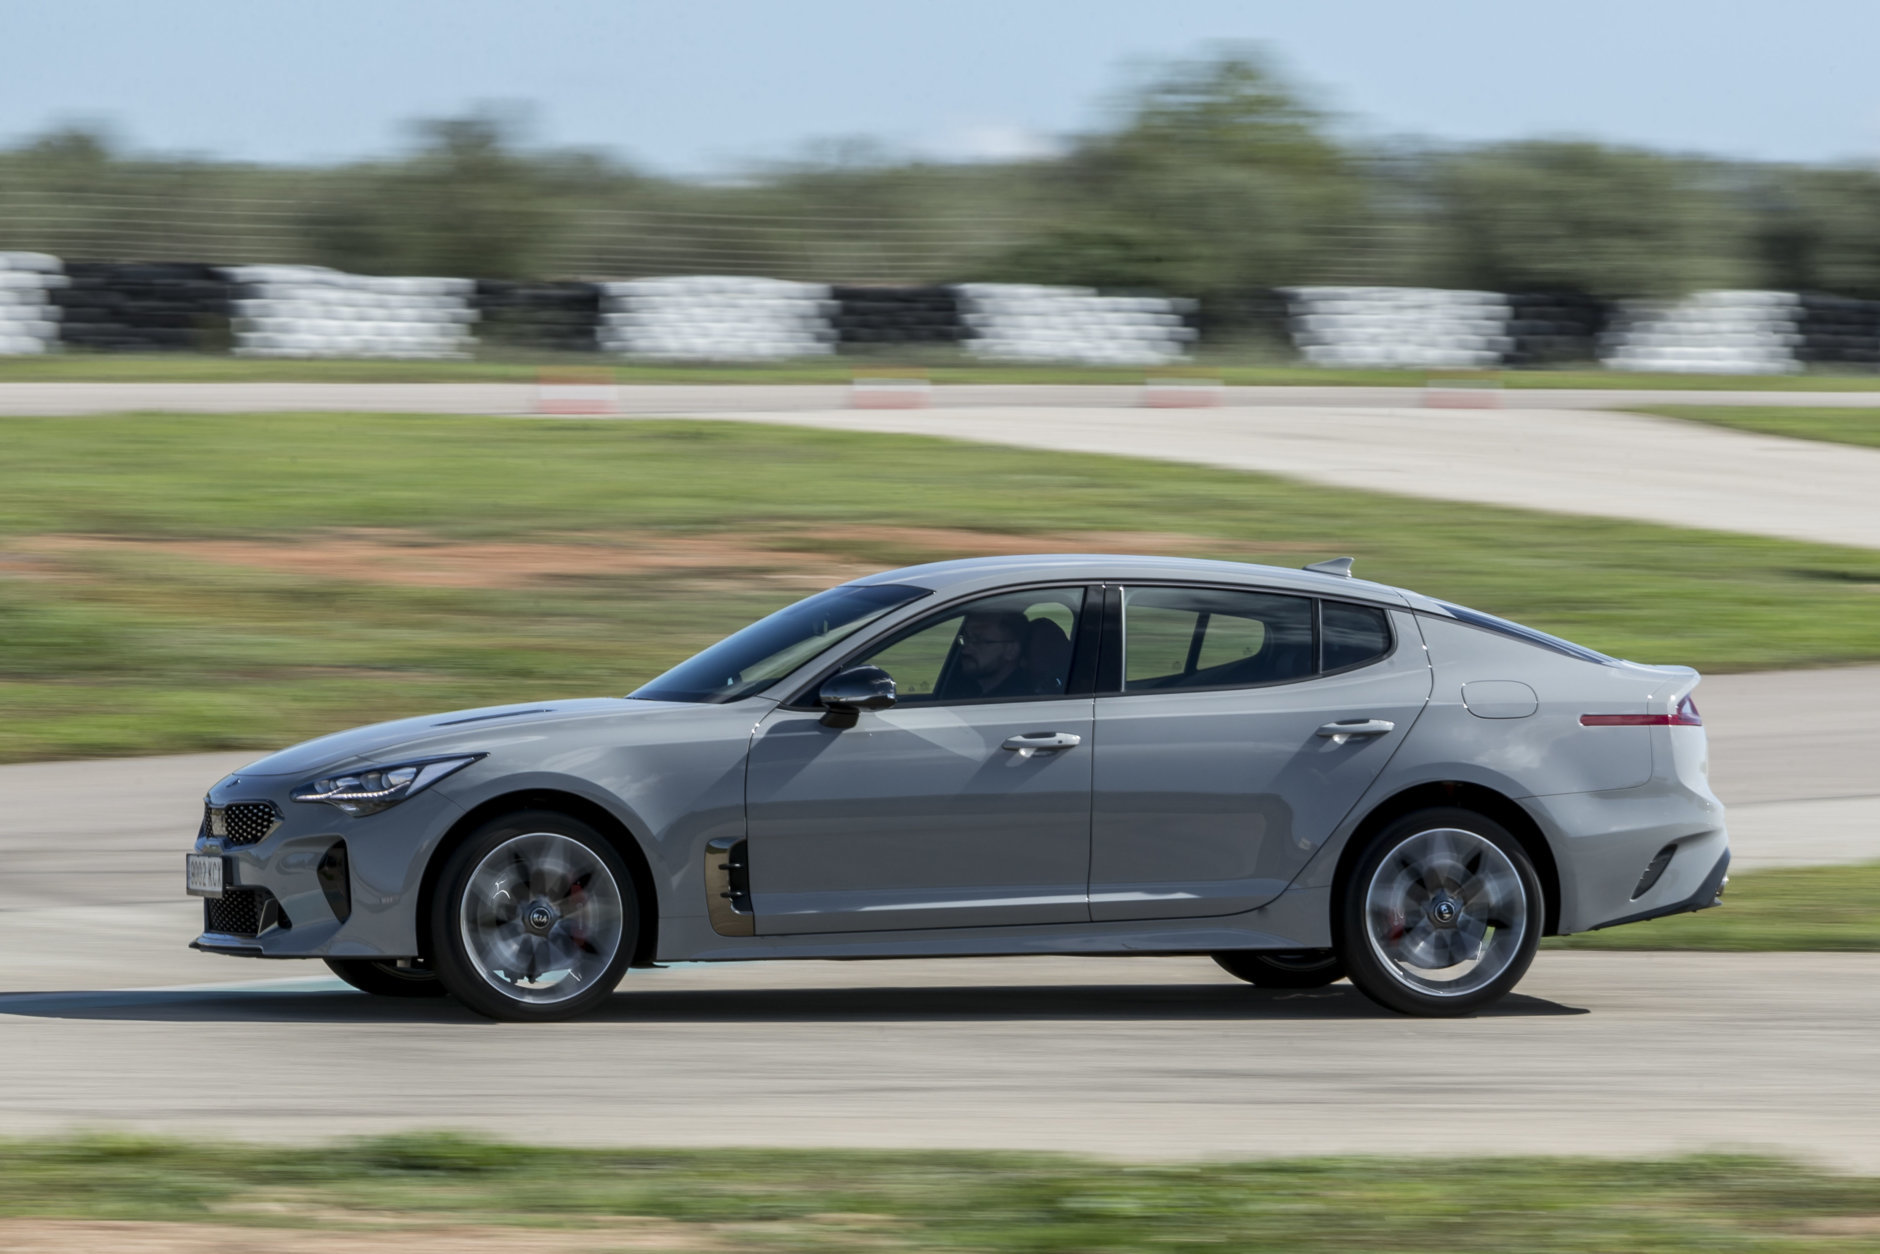 The Kia Stinger is one of the contenders on Motor Trend's Best Driver's Car list. (Photo by Andres Iglesias Rodriguez/Getty Images for Kia Stinger)